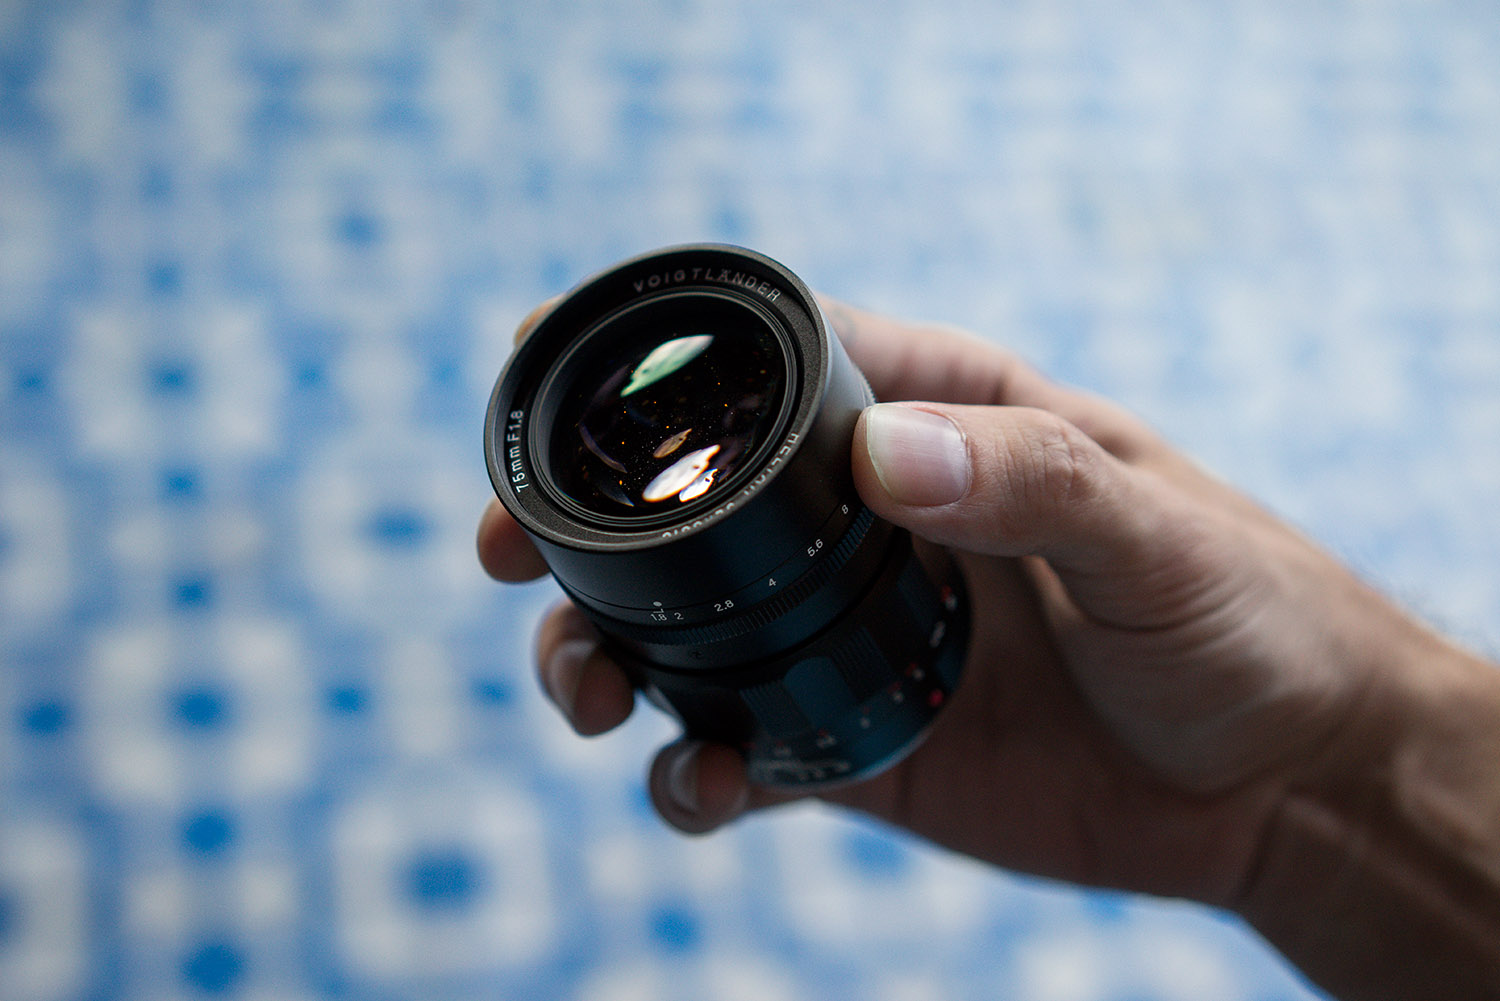 The Voigtlander 75mm f1.8 Heliar Classic Lens Review by Johnny 